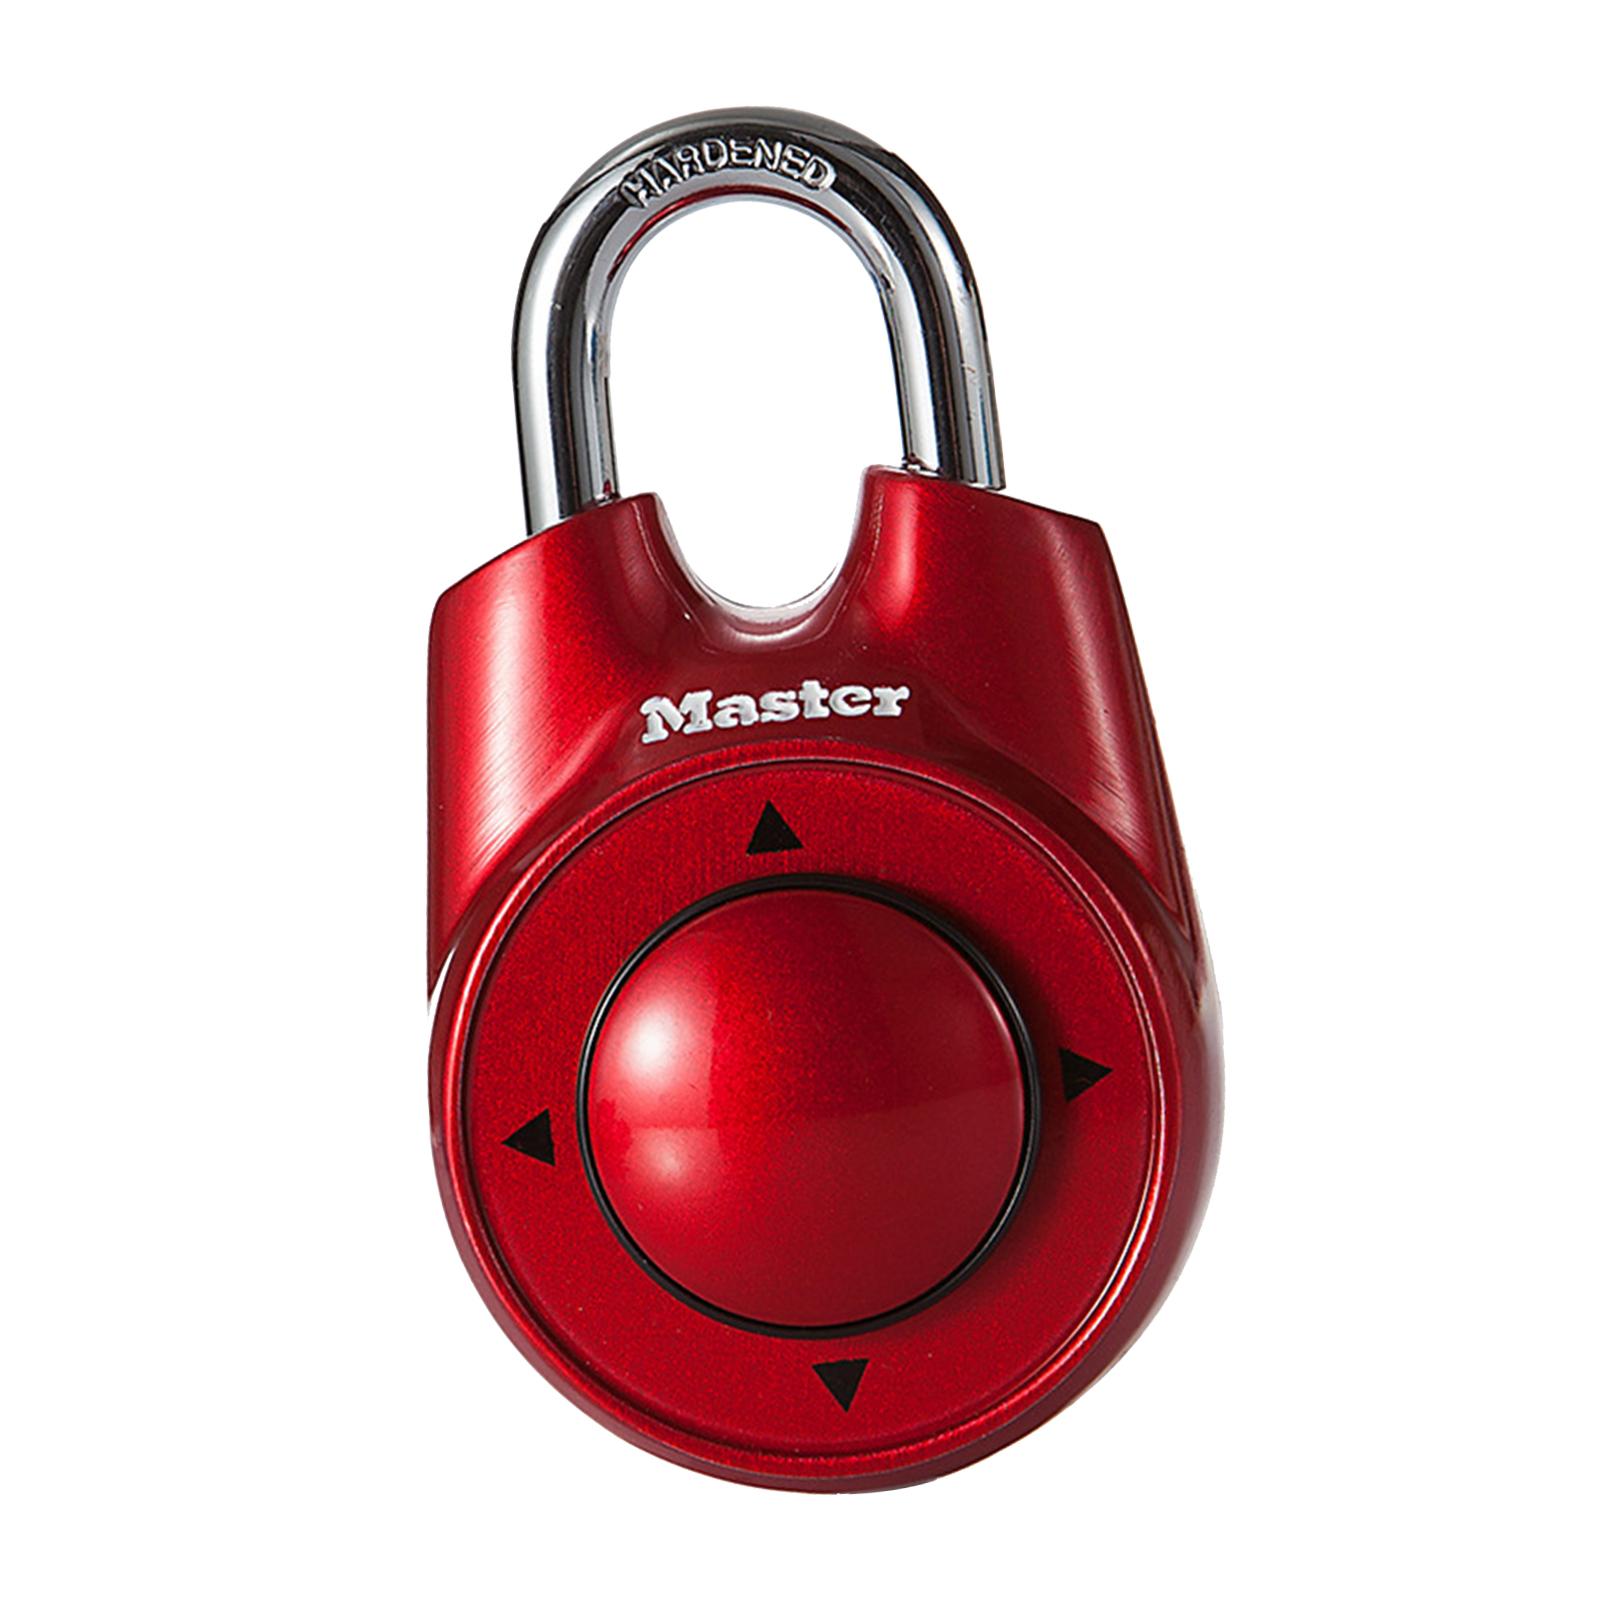 Combination Padlock Portable Travel Padlock for Luggage Fences Going Outside Red